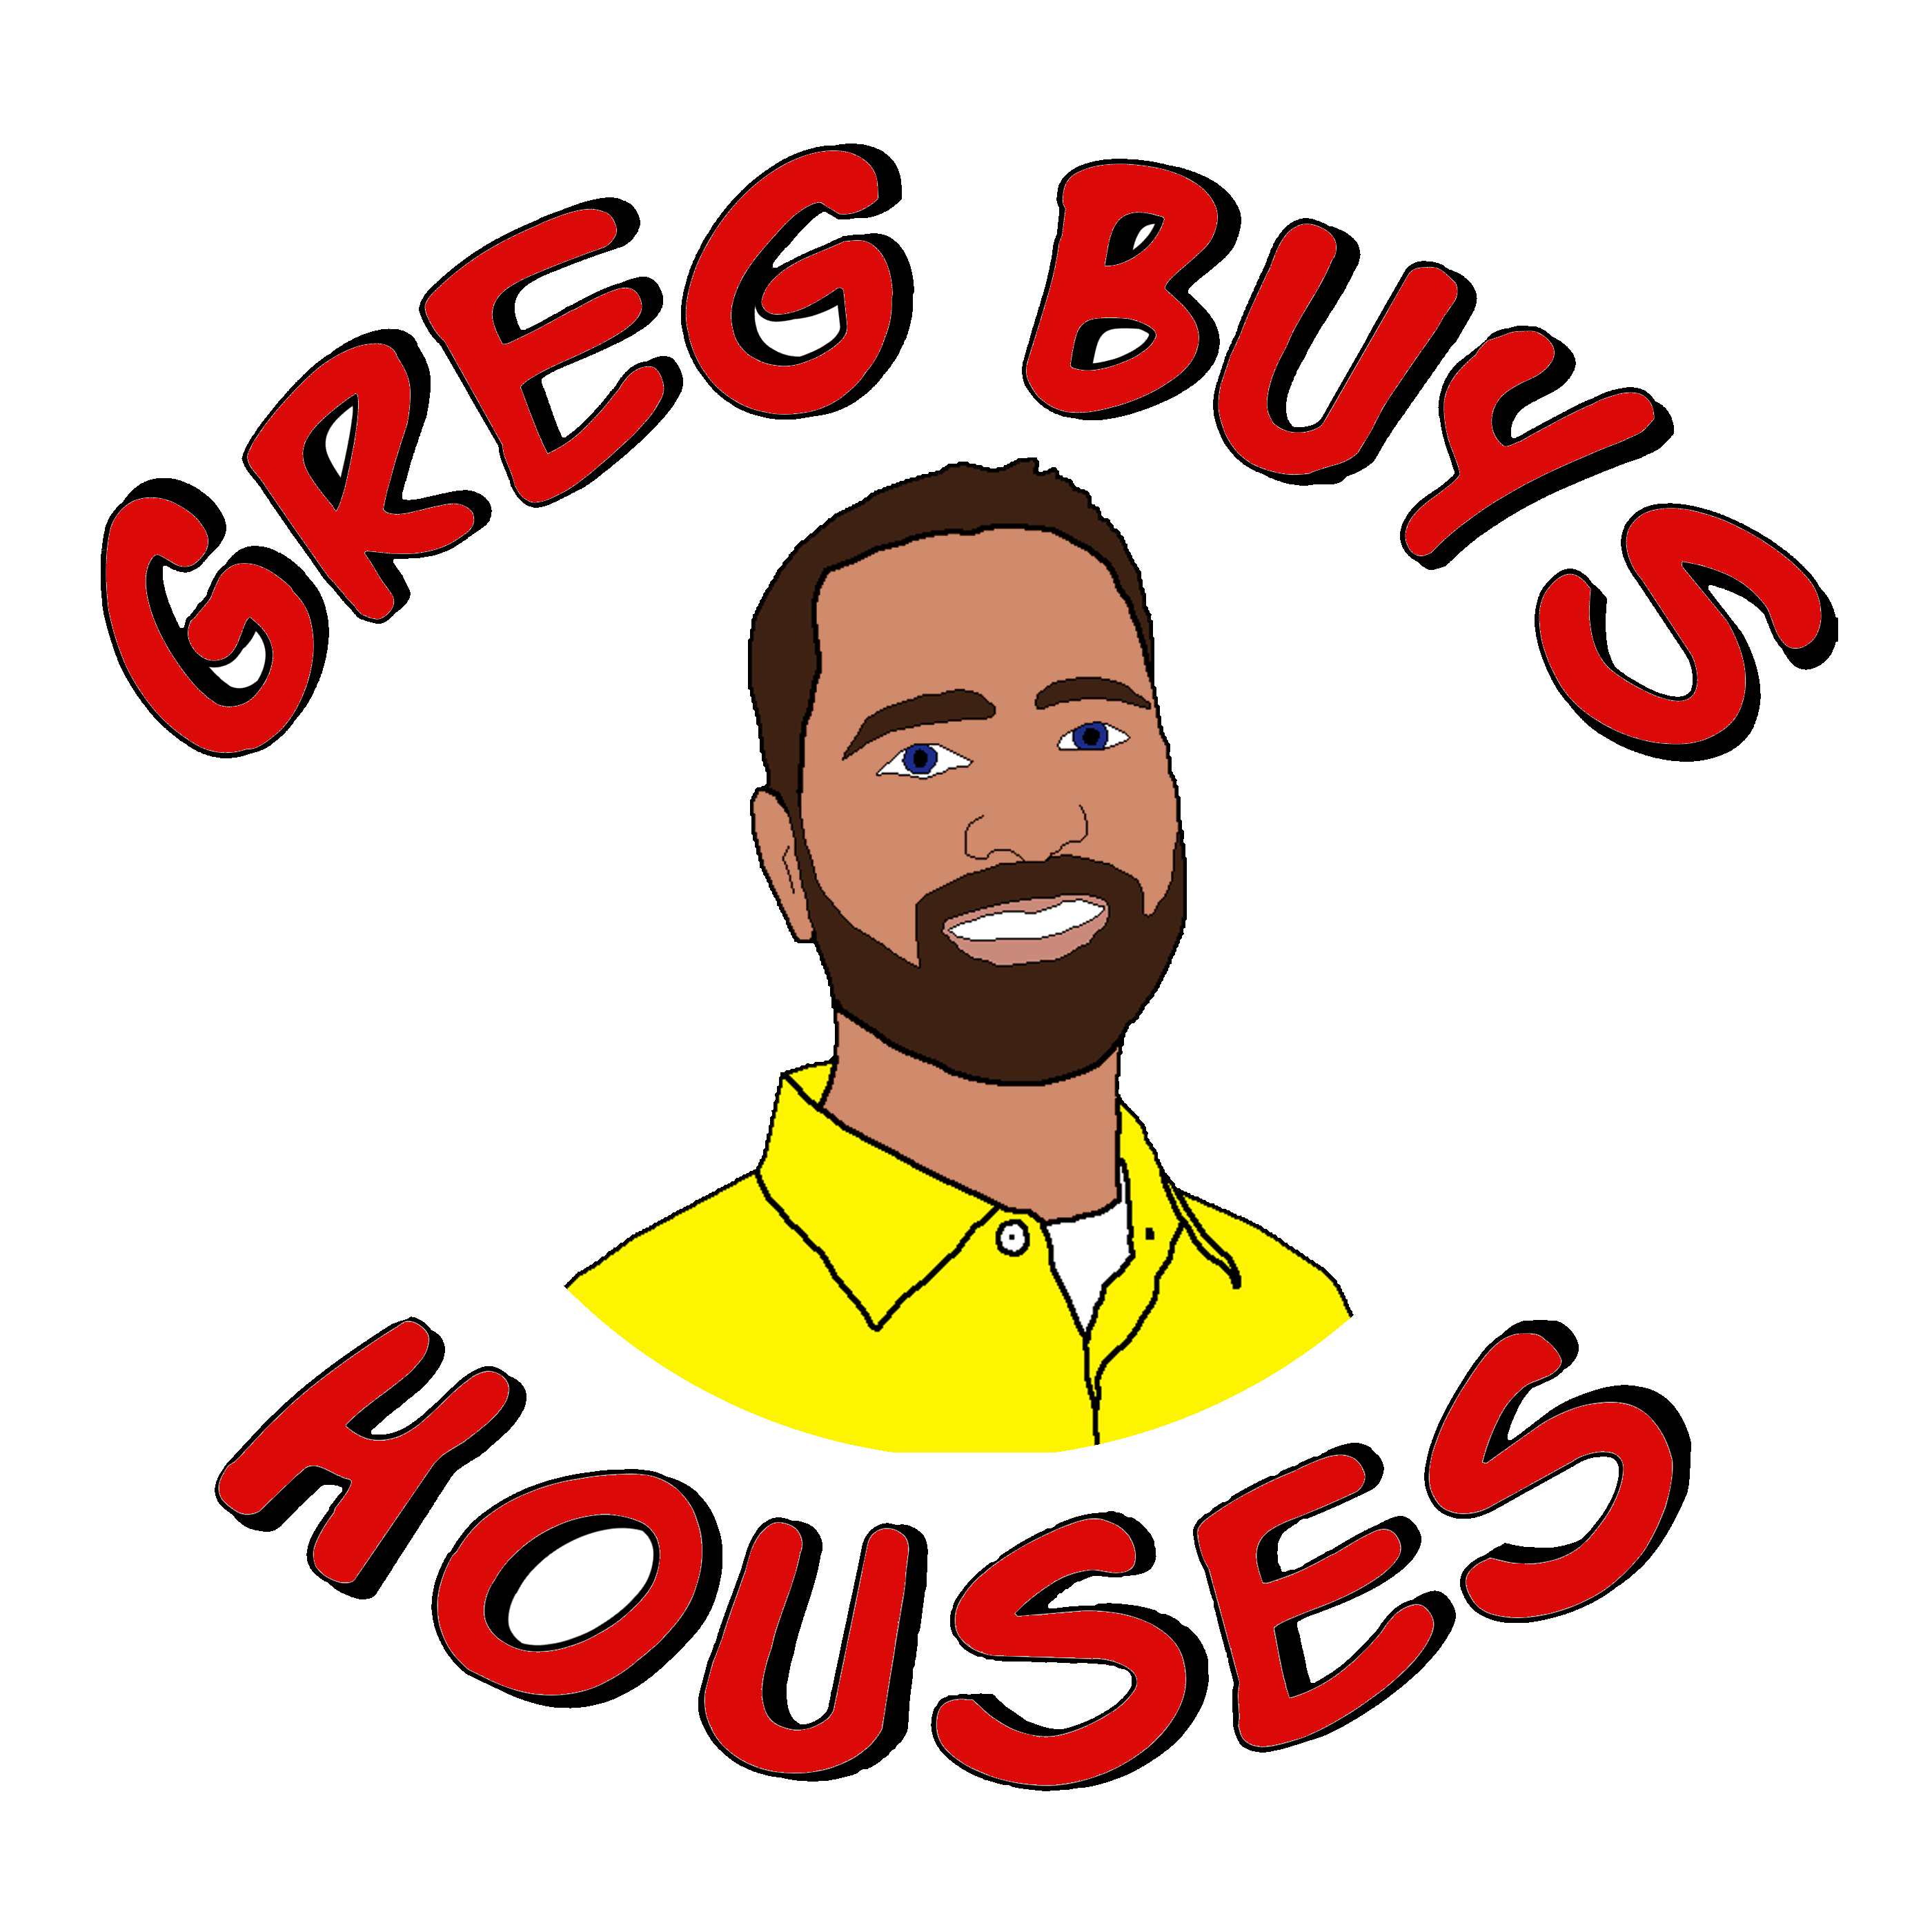 Sell your house fast - Greg Buys Houses